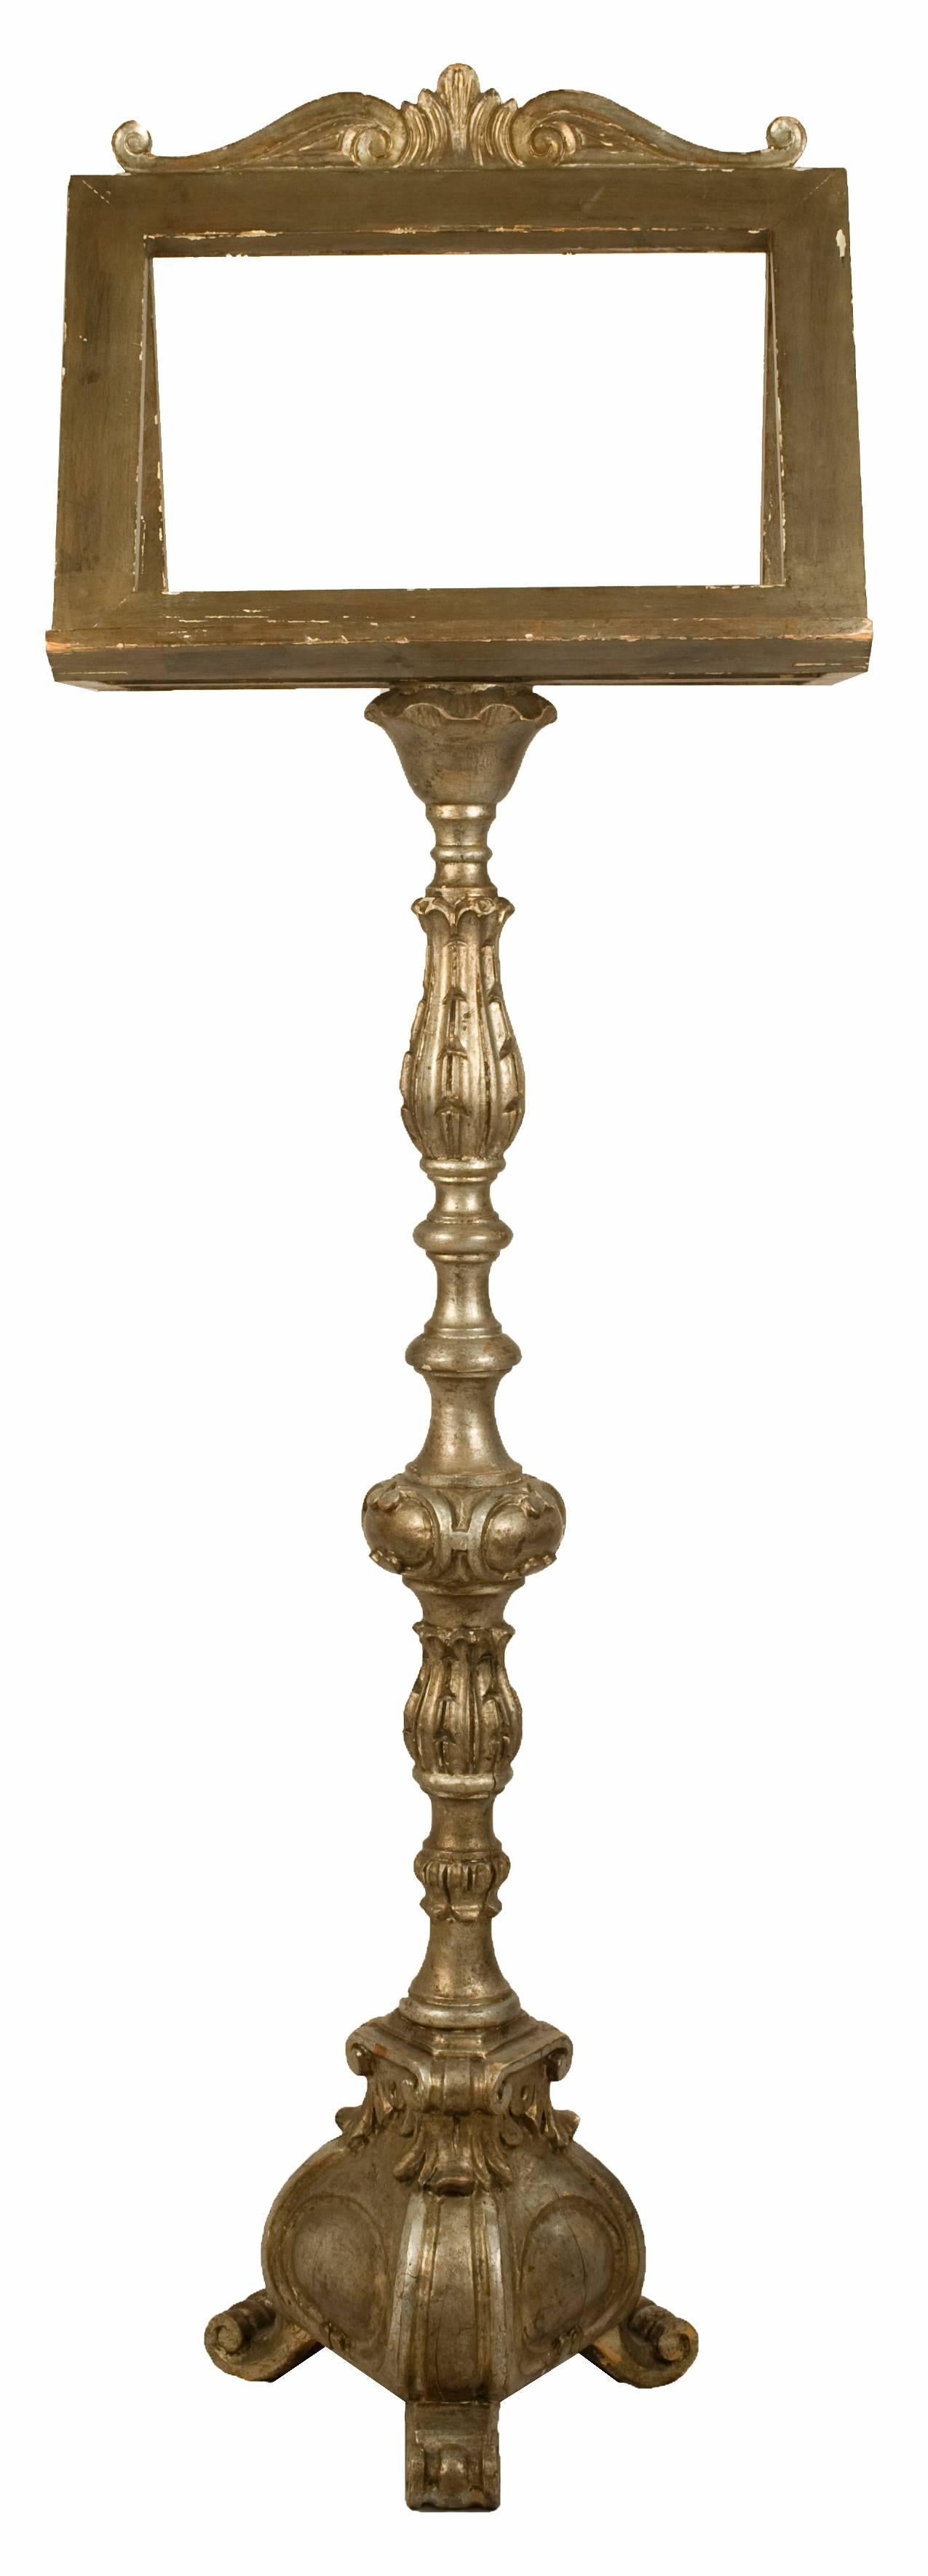 A tall floor music stand or lectern, elegantly carved and detailed. Double-sided lectern topped with simple filigree crest and supported on carved and turned stem, with tripod base ending in scrolled feet.